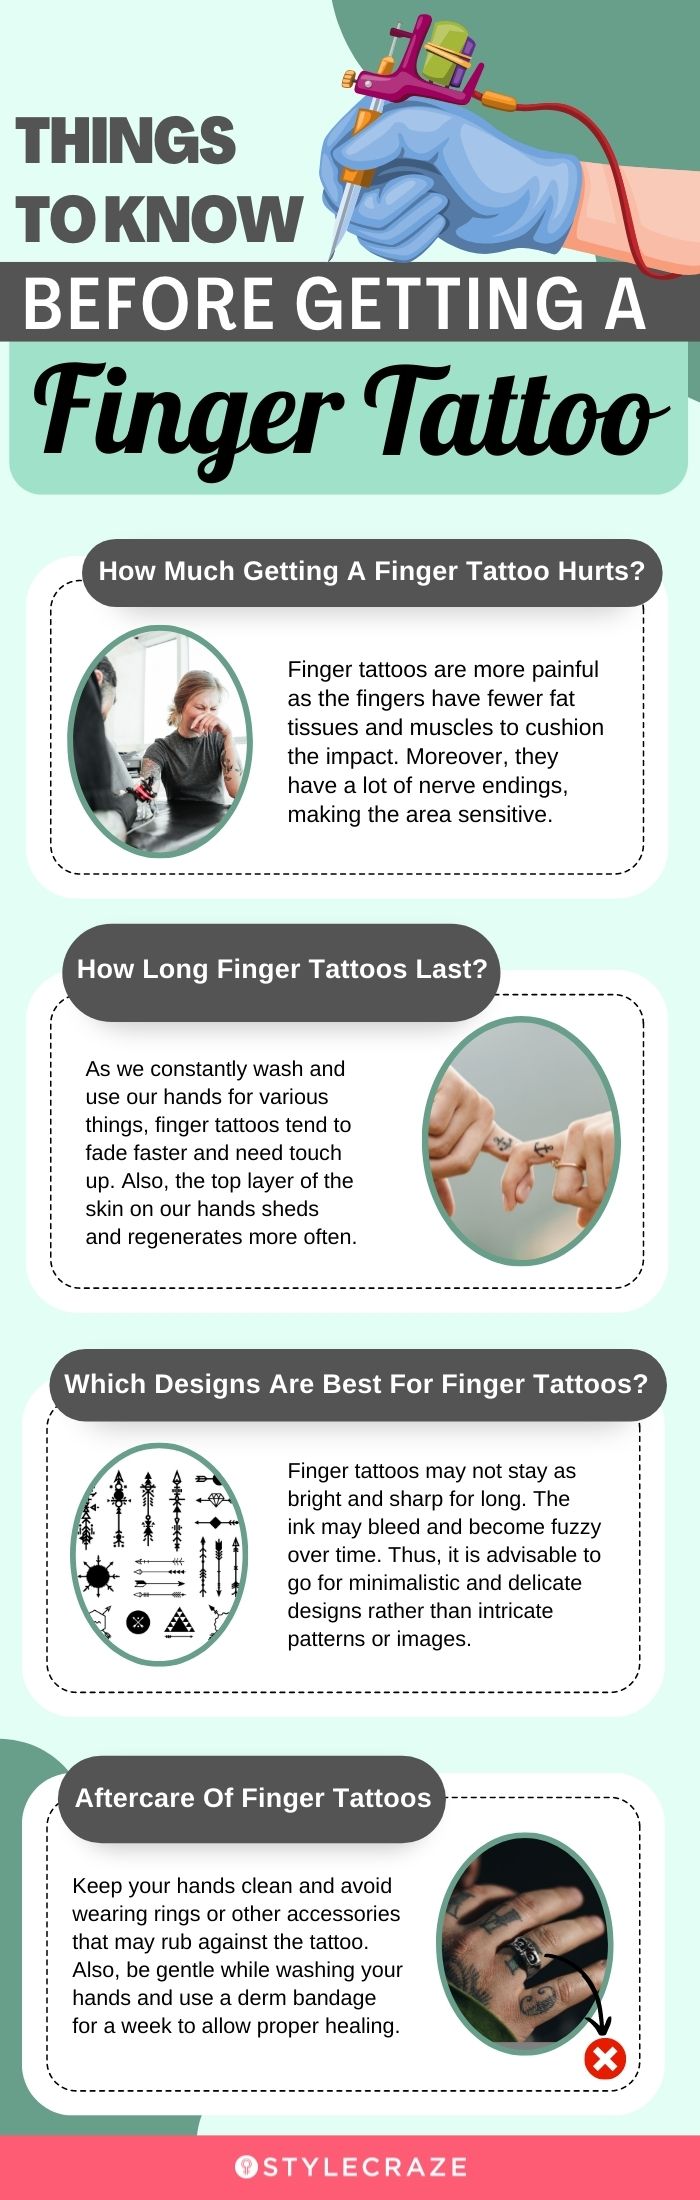 things to know before getting a finger tattoo (infographic)